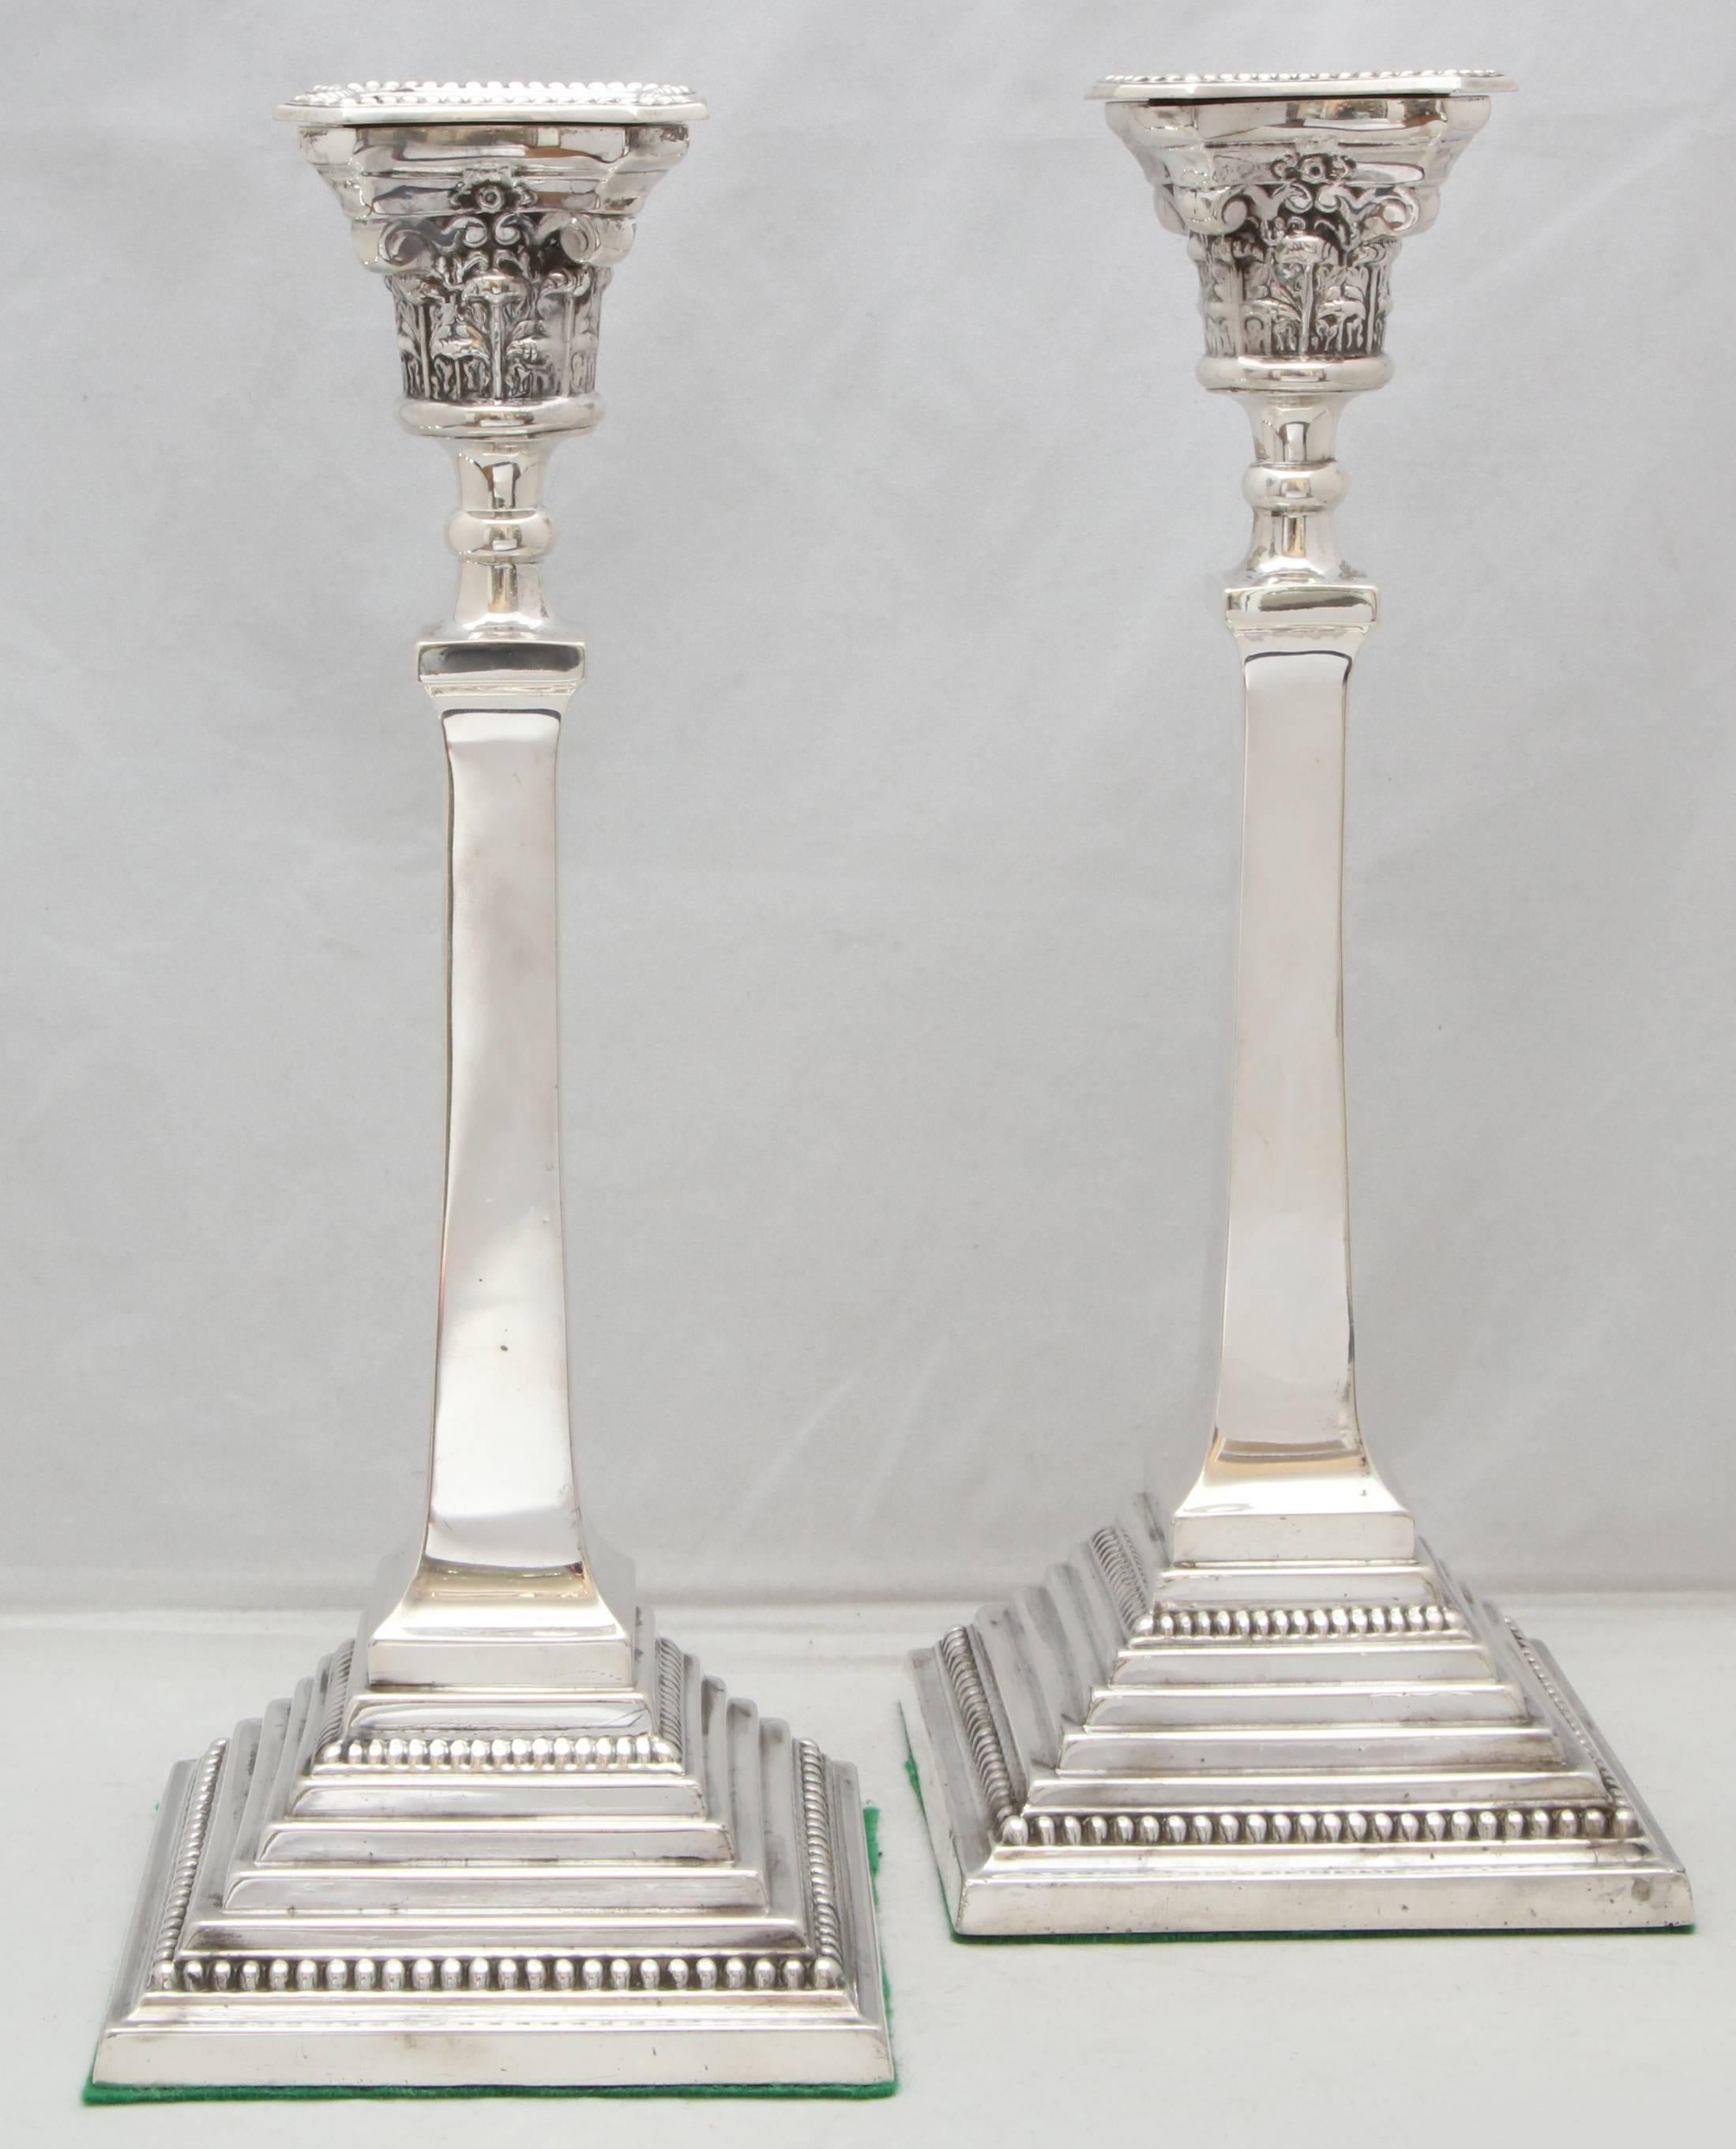 Tall, Edwardian, sterling silver, neoclassical, column-form candlesticks, Birmingham, England, 1914, Bayliss and Coulthard - makers. Measures: 12 1/2 high x 5 wide x 5 deep (at square base of each). Weighted. Beaded motif on bases of each is picked